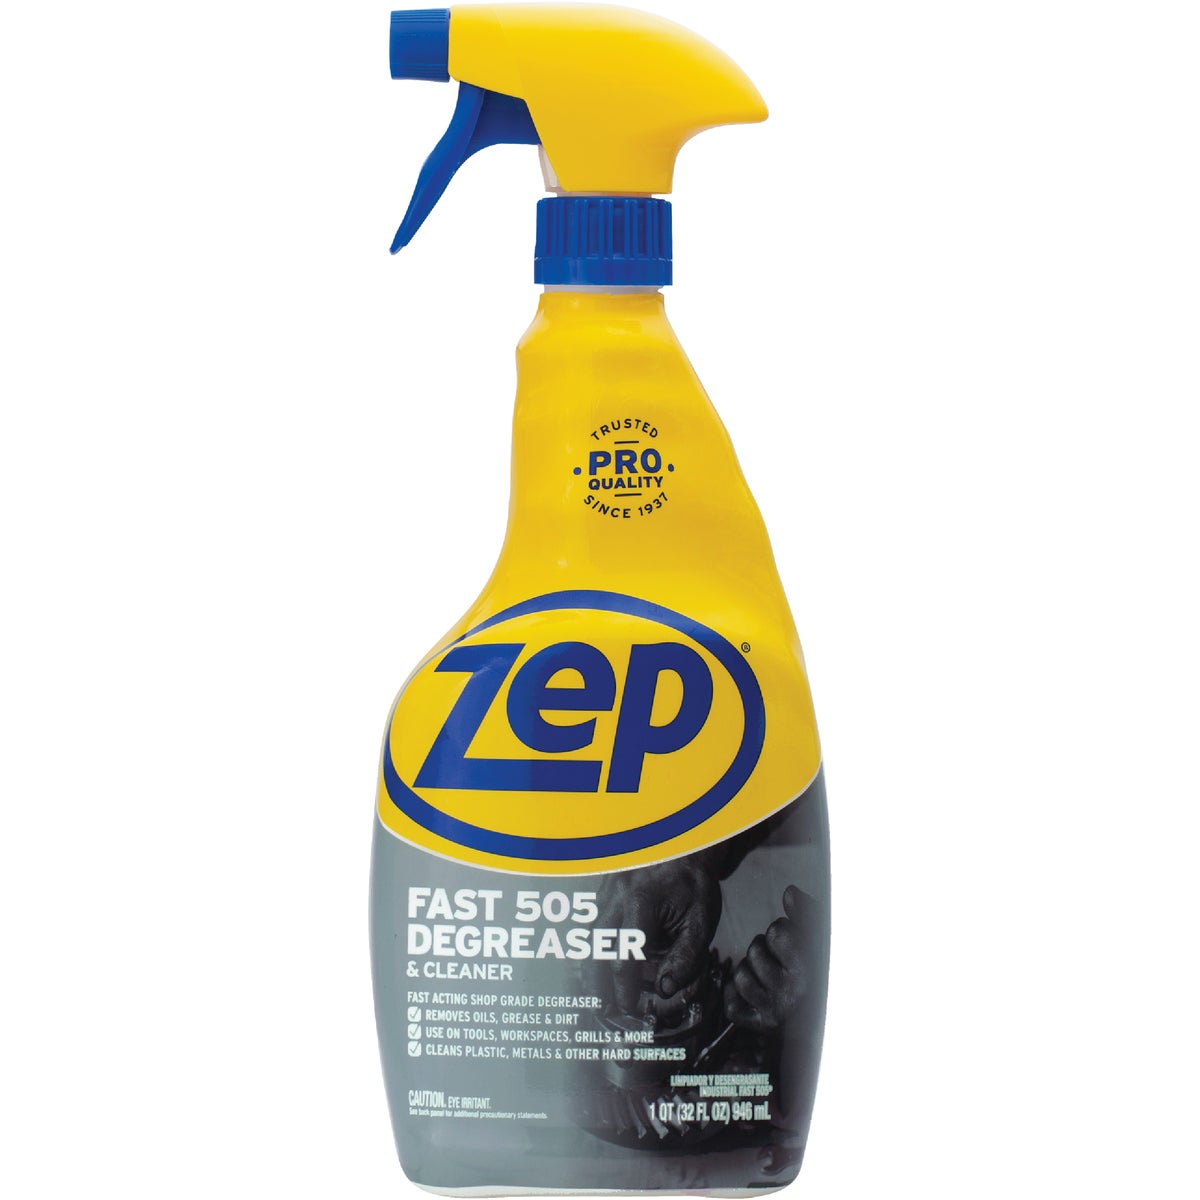 Item 618825, Zep Fast 505 cleaner and degreaser penetrates to remove soils without 